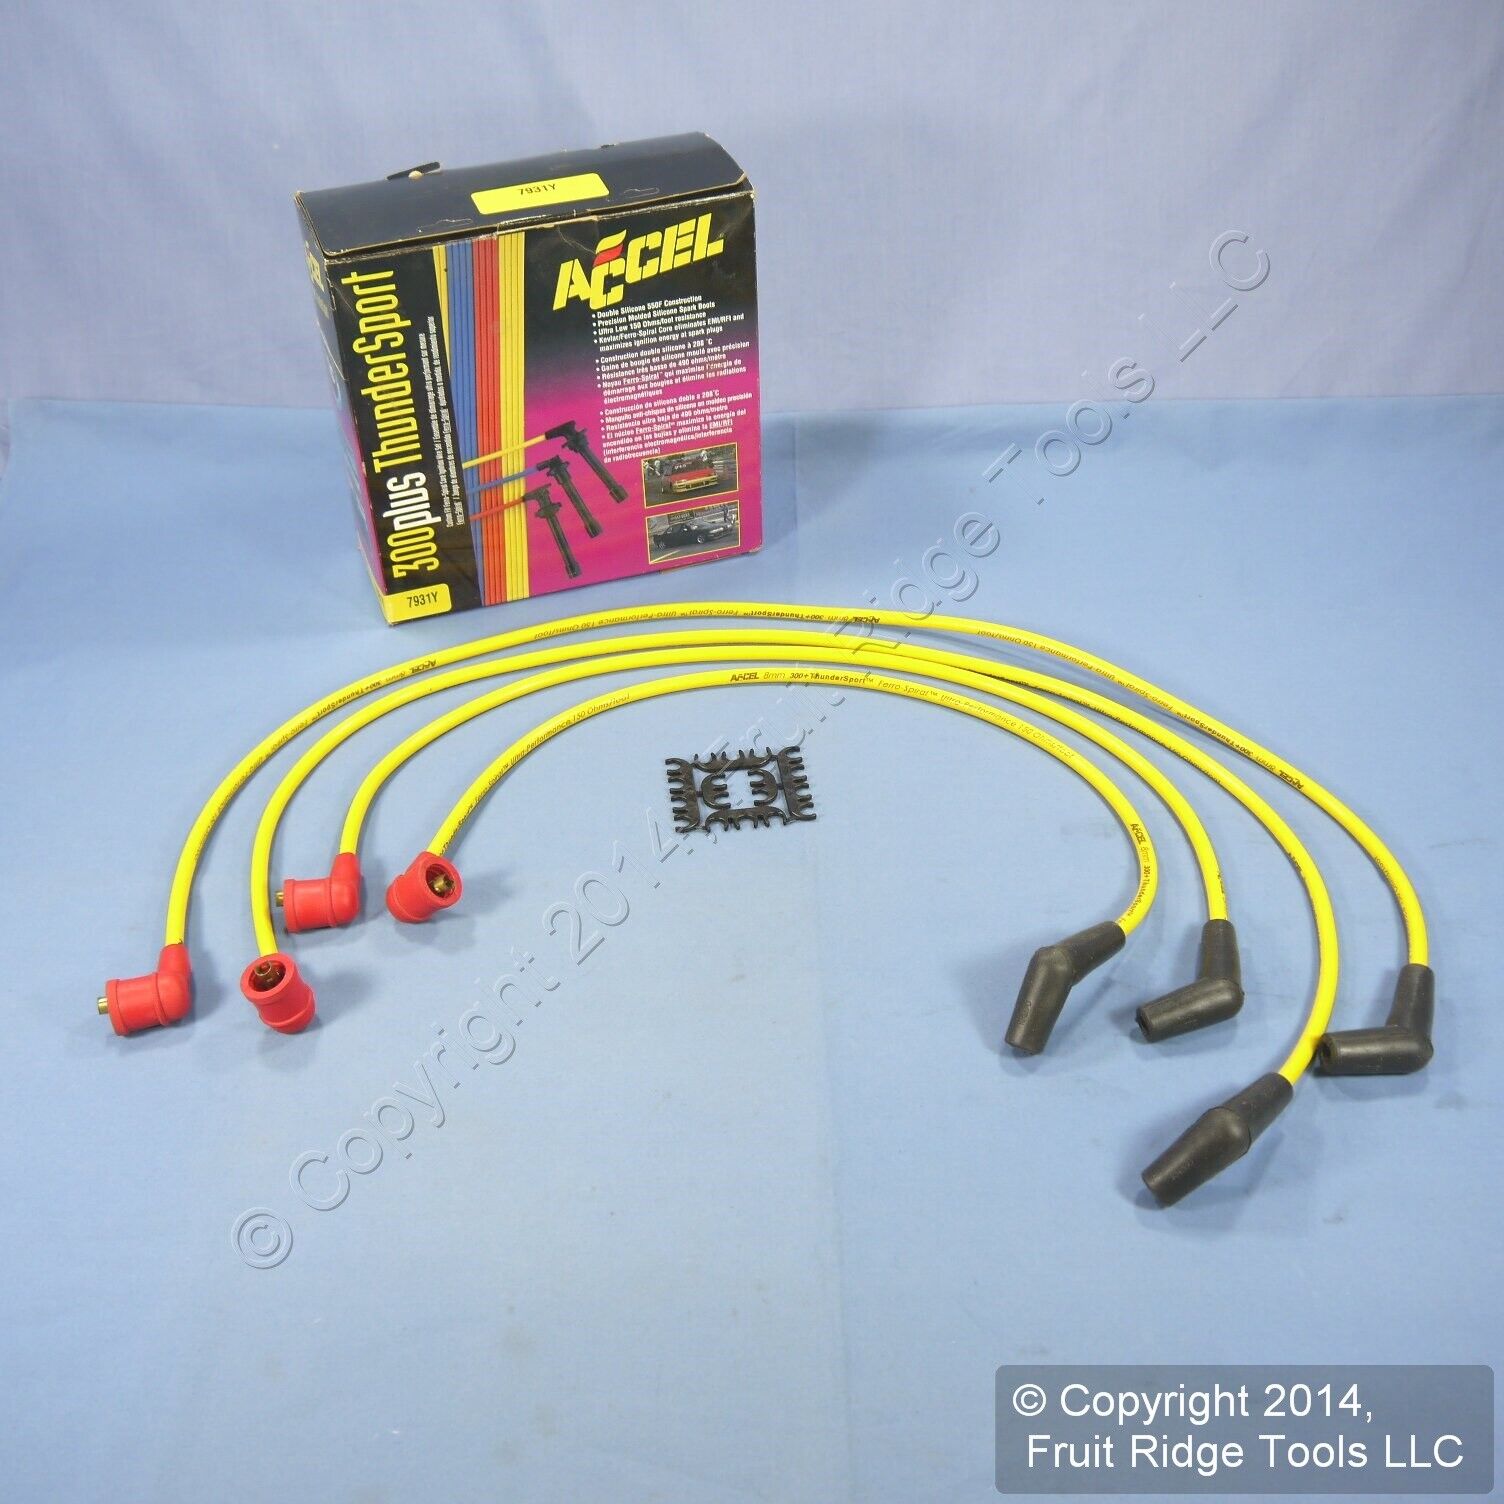 ACCEL 7931Y Yellow 8MM Spark Plug Wire Set 27,30,41,41 Inches Flux Capacitor